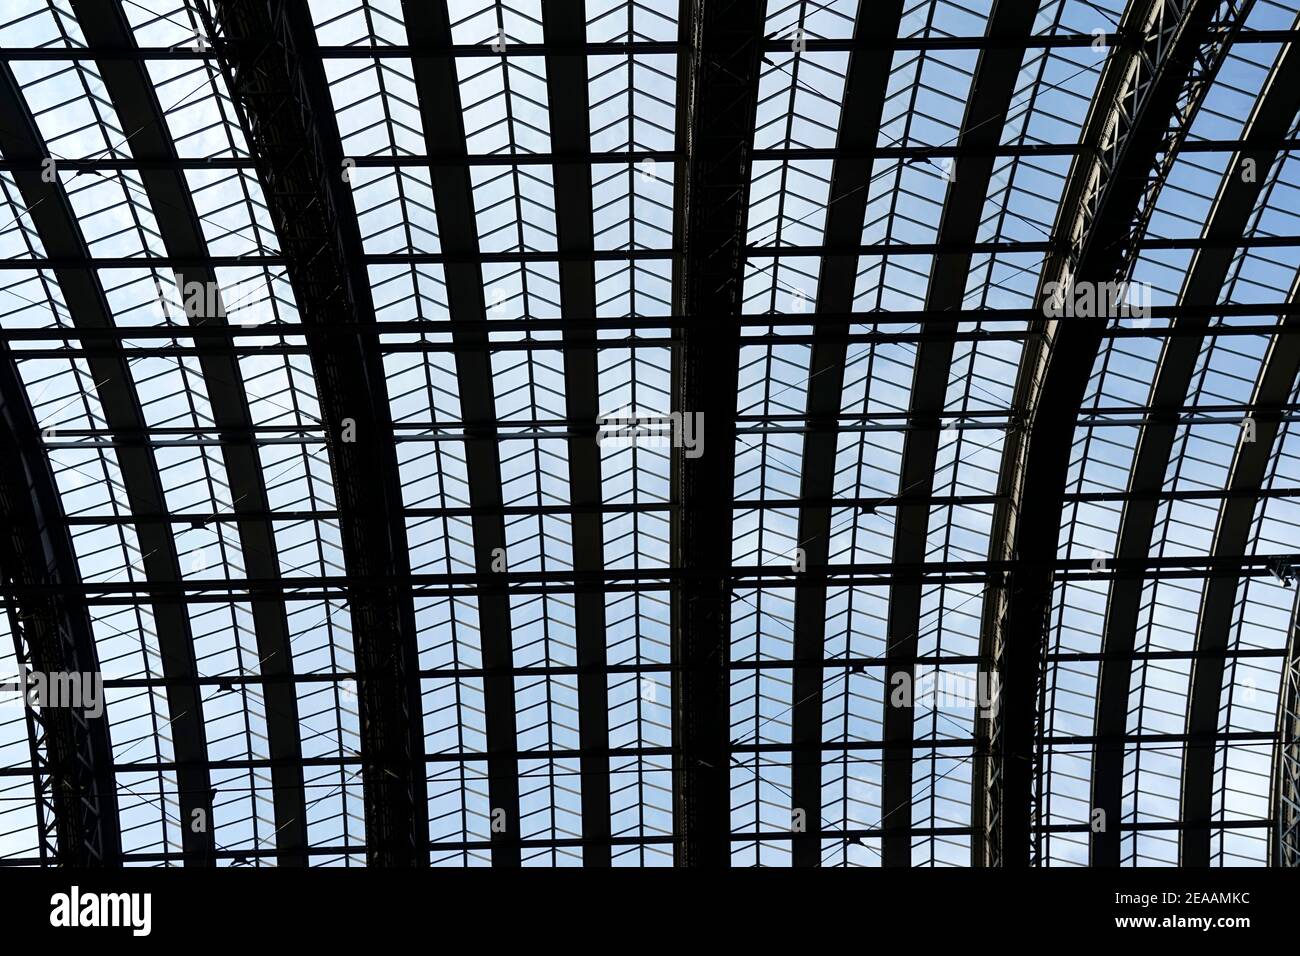 Germany, Hessen, Frankfurt, central station, station hall, roof structure, glass, metal girders Stock Photo